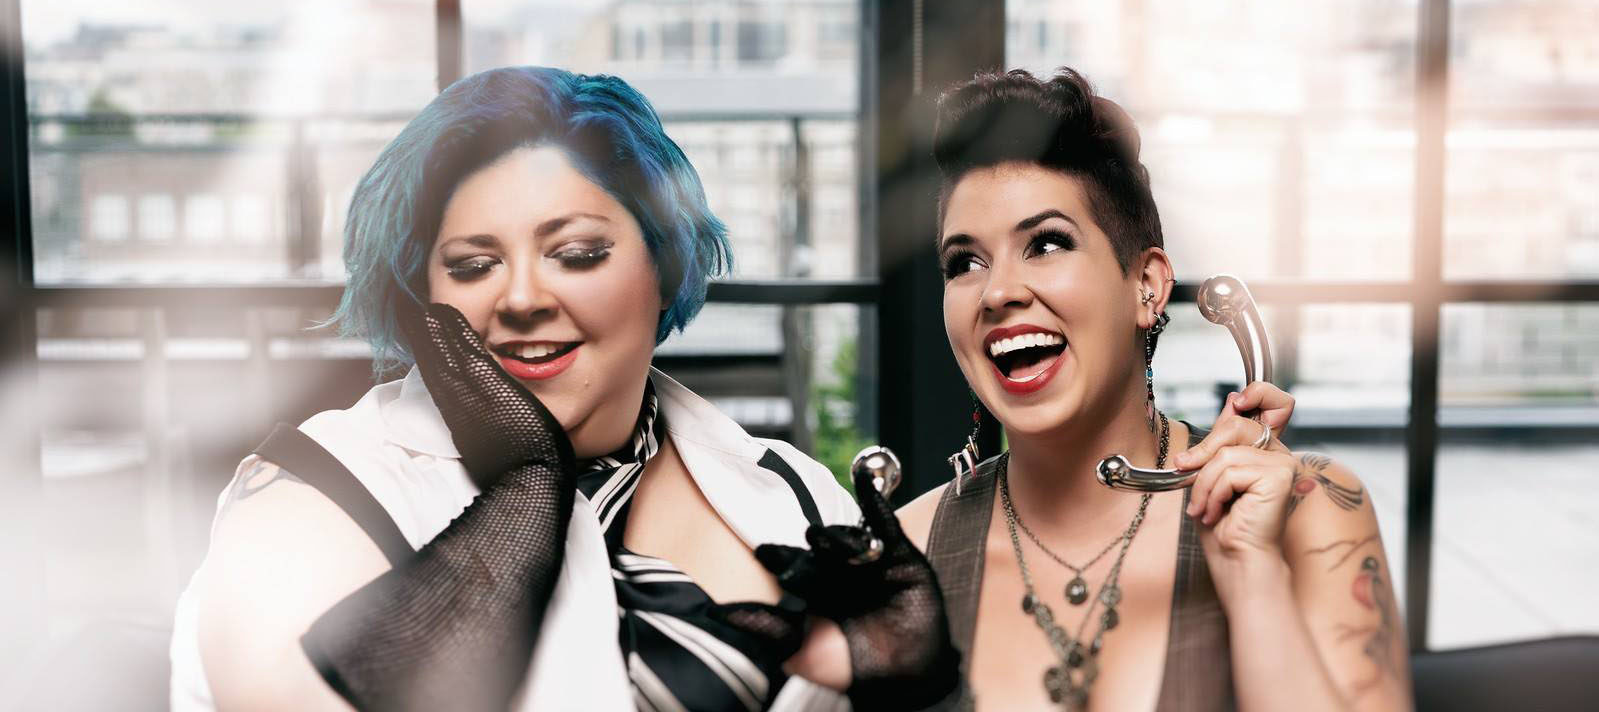 Image of Diva Darling wearing an Njoy butt plug like a ring and smiling, beside Mindi Mimosa holding an Njoy Pure Wand to her ear like a phone.